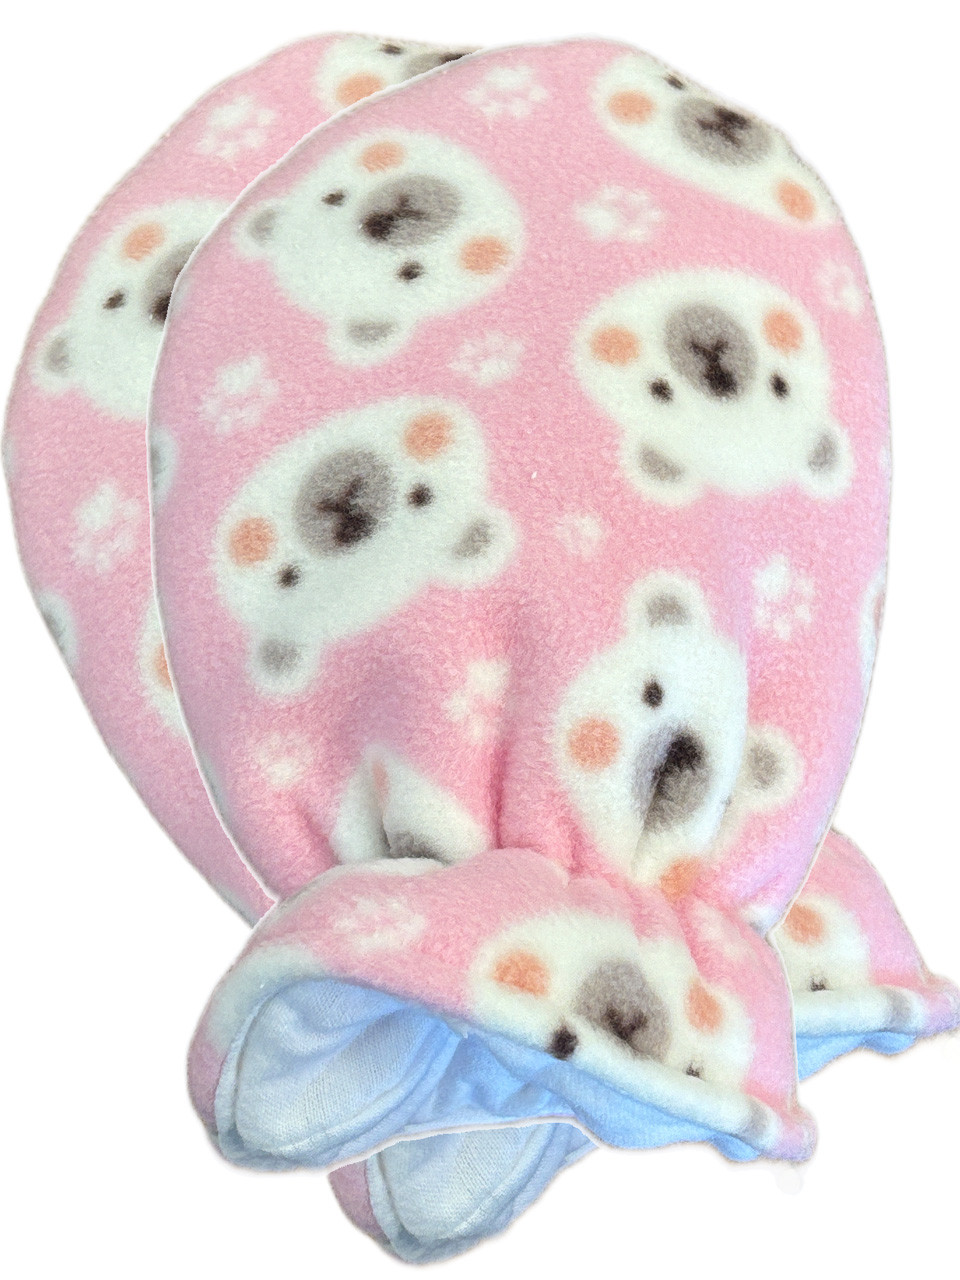 Cuddlz Pink Teddy Pattern fleece ABDL Padded Adult Baby Mittens With ...